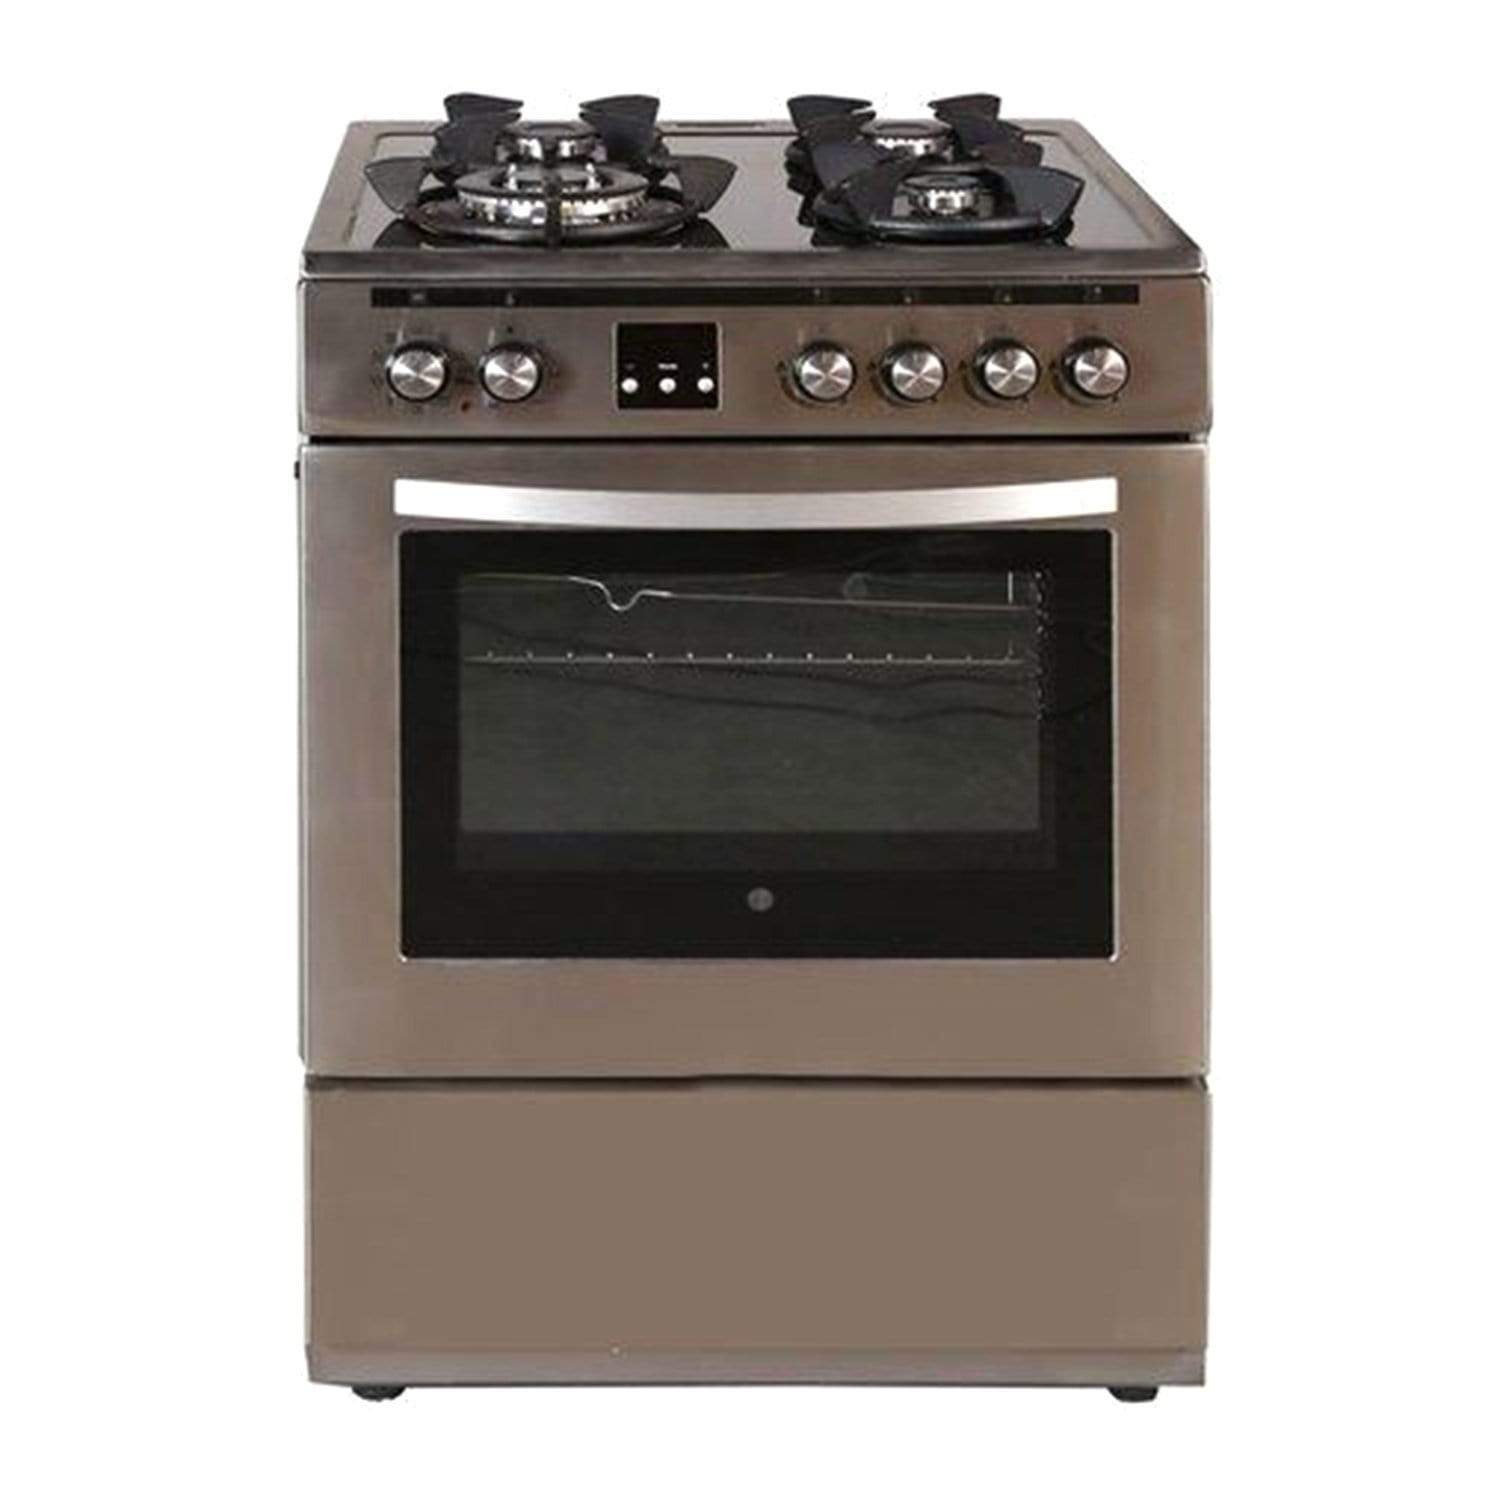 Hoover Dual Gas Cooker on Glass with Hob Electric Oven - Silver - FMC66.01S - Jashanmal Home